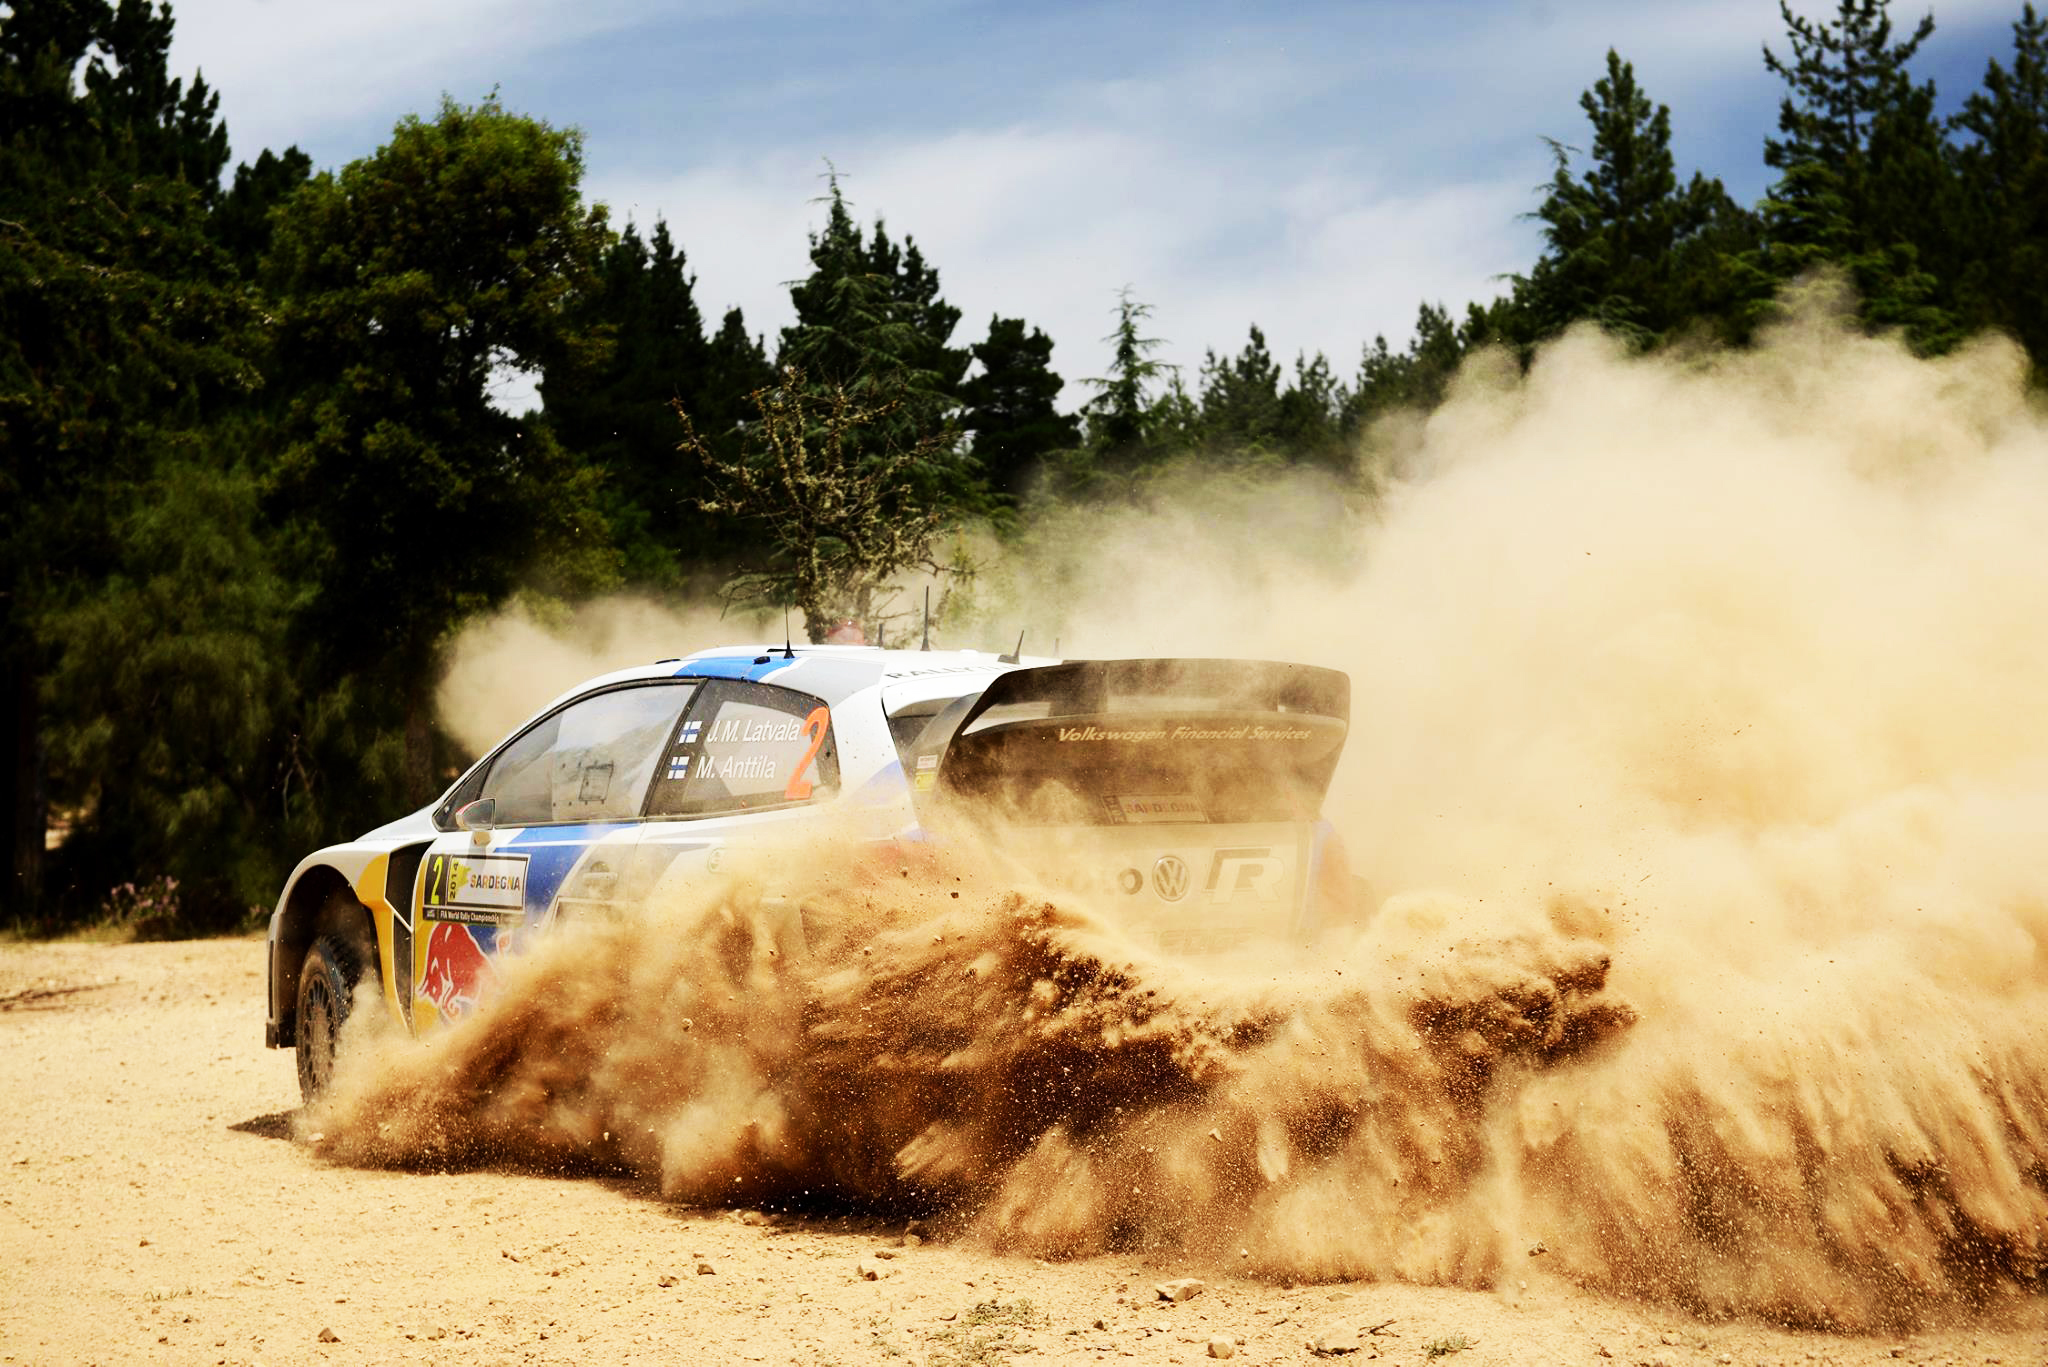 Free download wallpaper Sports, Rallying on your PC desktop